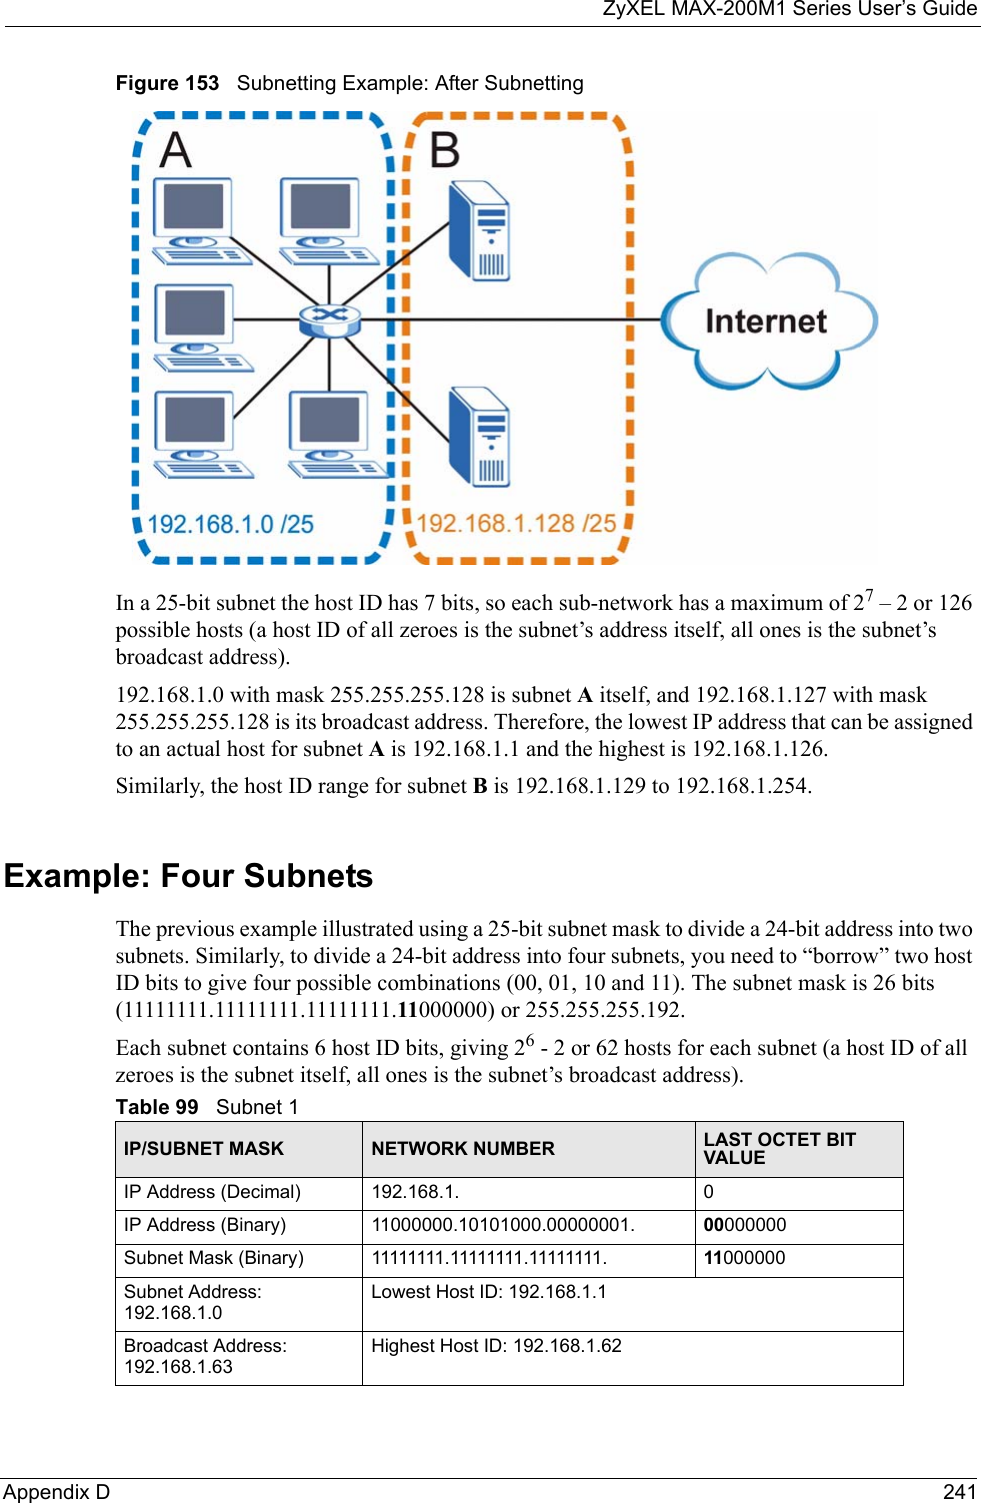 ZyXEL MAX-200M1 Series User’s GuideAppendix D 241Figure 153   Subnetting Example: After SubnettingIn a 25-bit subnet the host ID has 7 bits, so each sub-network has a maximum of 27 – 2 or 126 possible hosts (a host ID of all zeroes is the subnet’s address itself, all ones is the subnet’s broadcast address).192.168.1.0 with mask 255.255.255.128 is subnet A itself, and 192.168.1.127 with mask 255.255.255.128 is its broadcast address. Therefore, the lowest IP address that can be assigned to an actual host for subnet A is 192.168.1.1 and the highest is 192.168.1.126. Similarly, the host ID range for subnet B is 192.168.1.129 to 192.168.1.254.Example: Four Subnets The previous example illustrated using a 25-bit subnet mask to divide a 24-bit address into two subnets. Similarly, to divide a 24-bit address into four subnets, you need to “borrow” two host ID bits to give four possible combinations (00, 01, 10 and 11). The subnet mask is 26 bits (11111111.11111111.11111111.11000000) or 255.255.255.192. Each subnet contains 6 host ID bits, giving 26 - 2 or 62 hosts for each subnet (a host ID of all zeroes is the subnet itself, all ones is the subnet’s broadcast address). Table 99   Subnet 1IP/SUBNET MASK NETWORK NUMBER LAST OCTET BIT VALUEIP Address (Decimal) 192.168.1. 0IP Address (Binary) 11000000.10101000.00000001. 00000000Subnet Mask (Binary) 11111111.11111111.11111111. 11000000Subnet Address: 192.168.1.0Lowest Host ID: 192.168.1.1Broadcast Address: 192.168.1.63Highest Host ID: 192.168.1.62